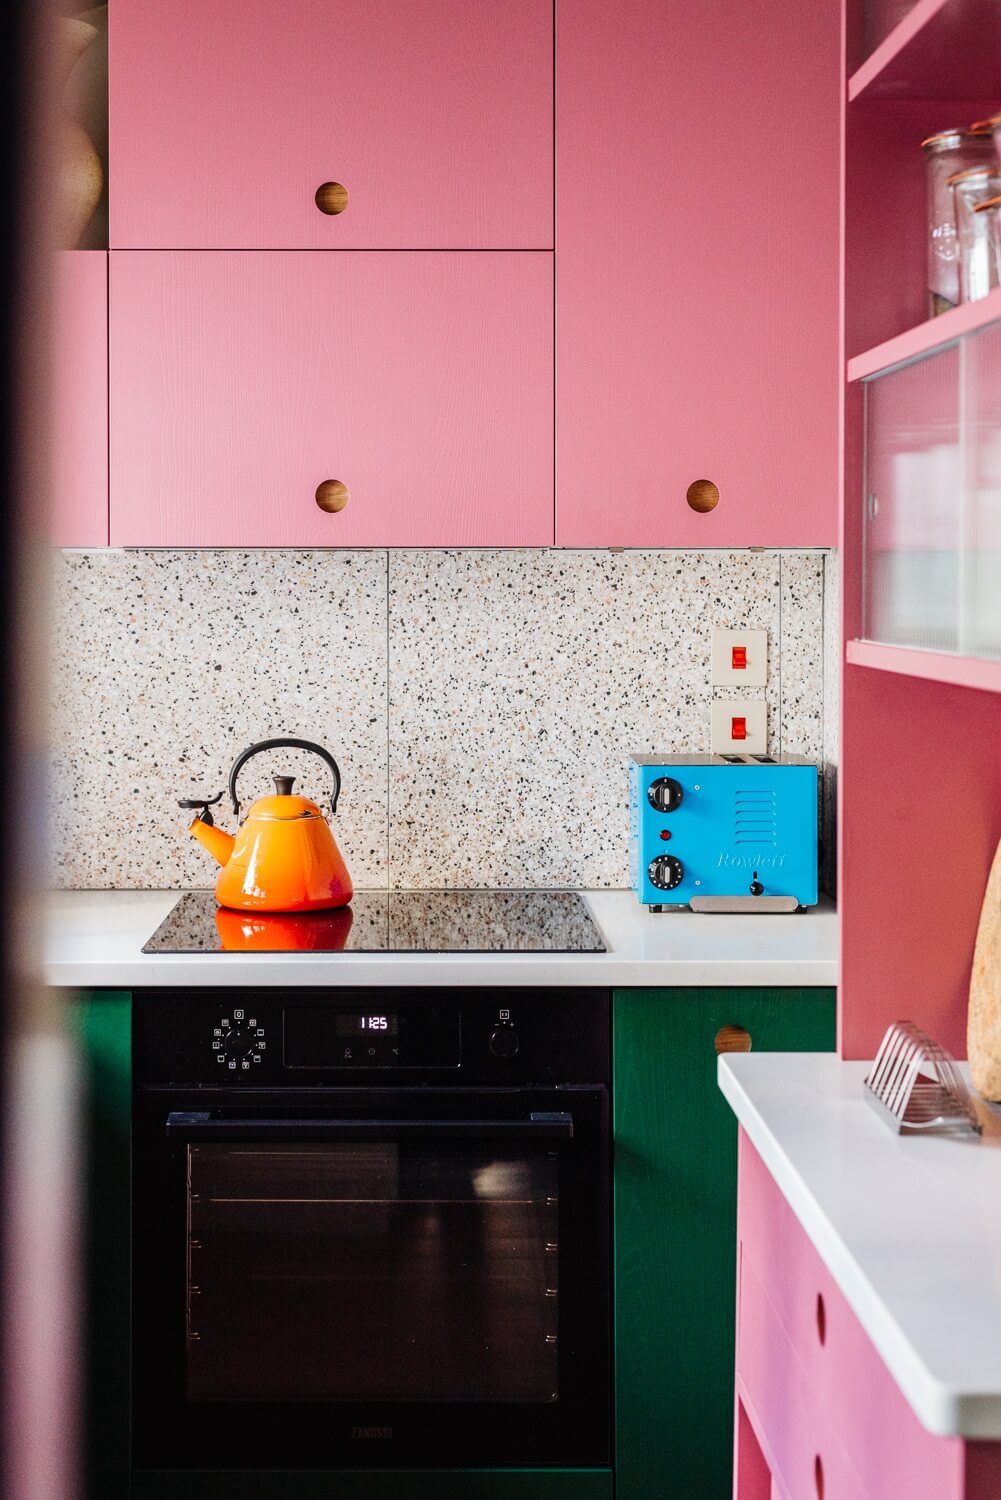 tiny-kitchen-pink-green-cabinets-nordroom